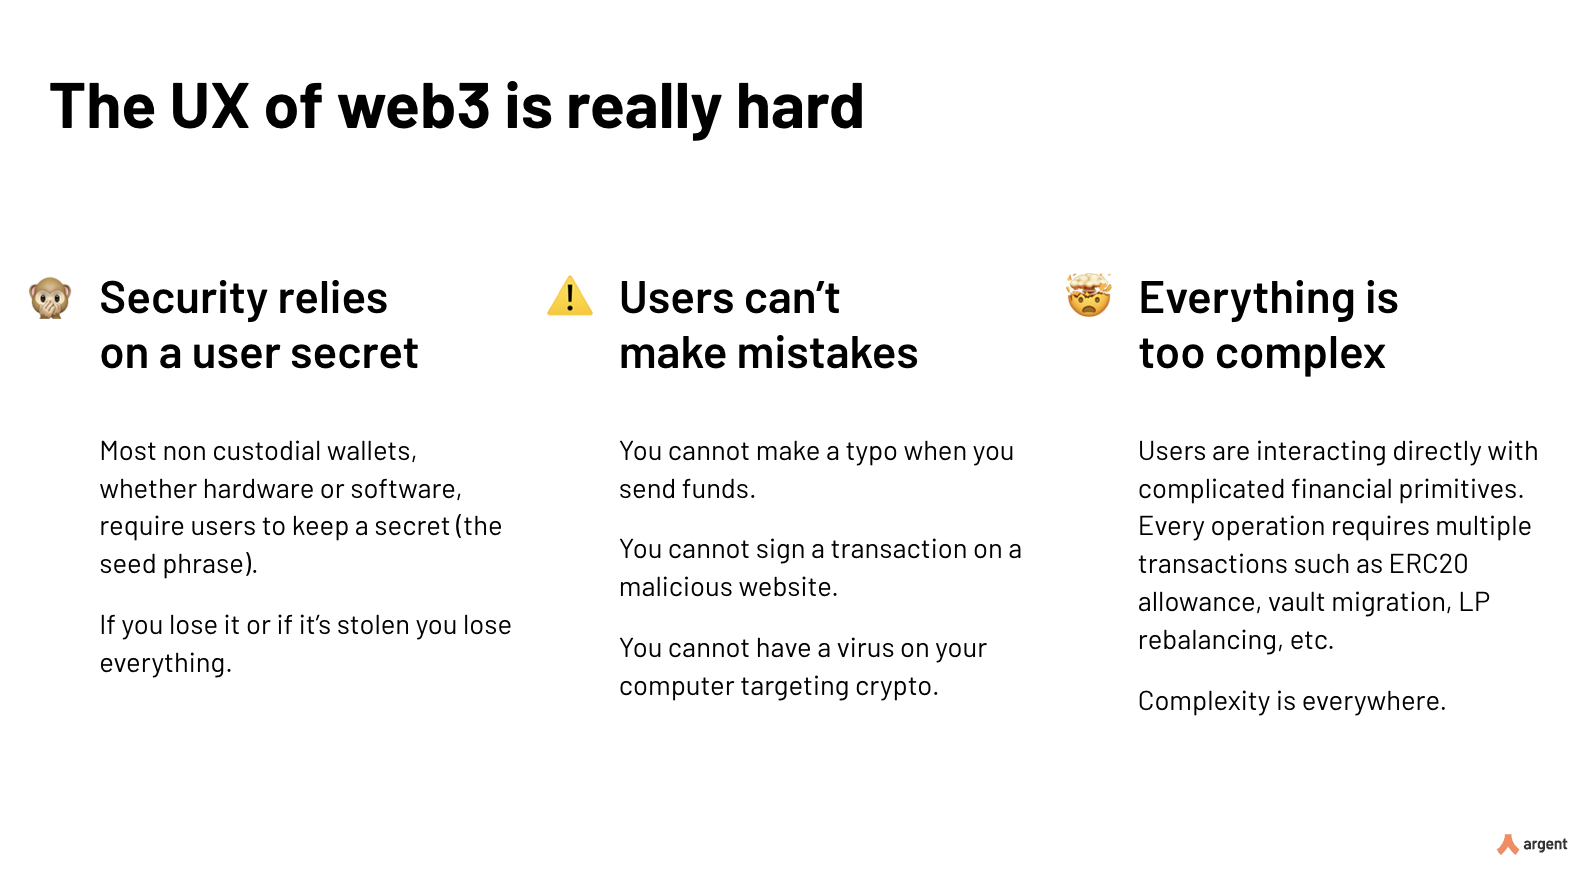 The UX of web3 is really hard